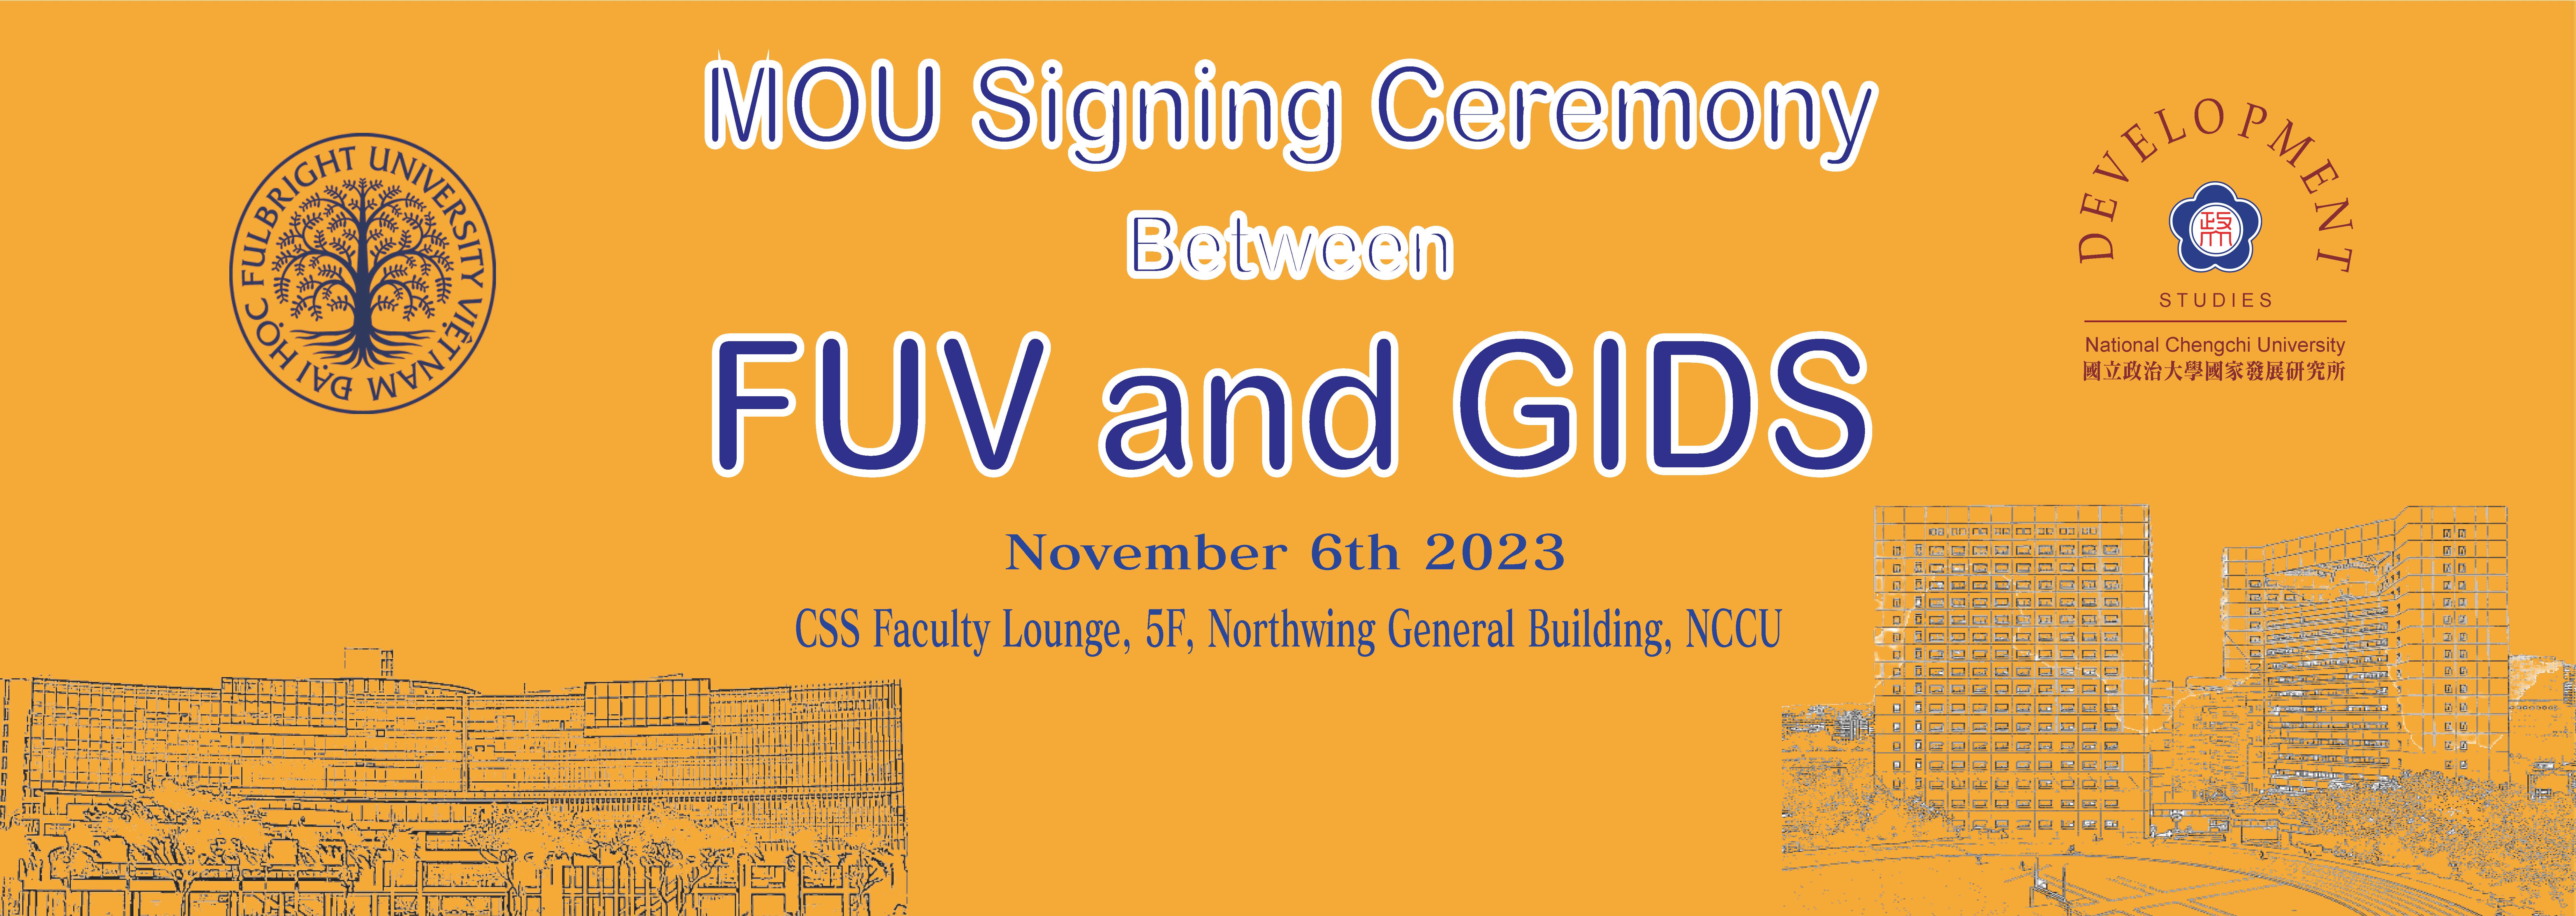 2023-11-06_MOU Signing Ceremony Between FUV and GI